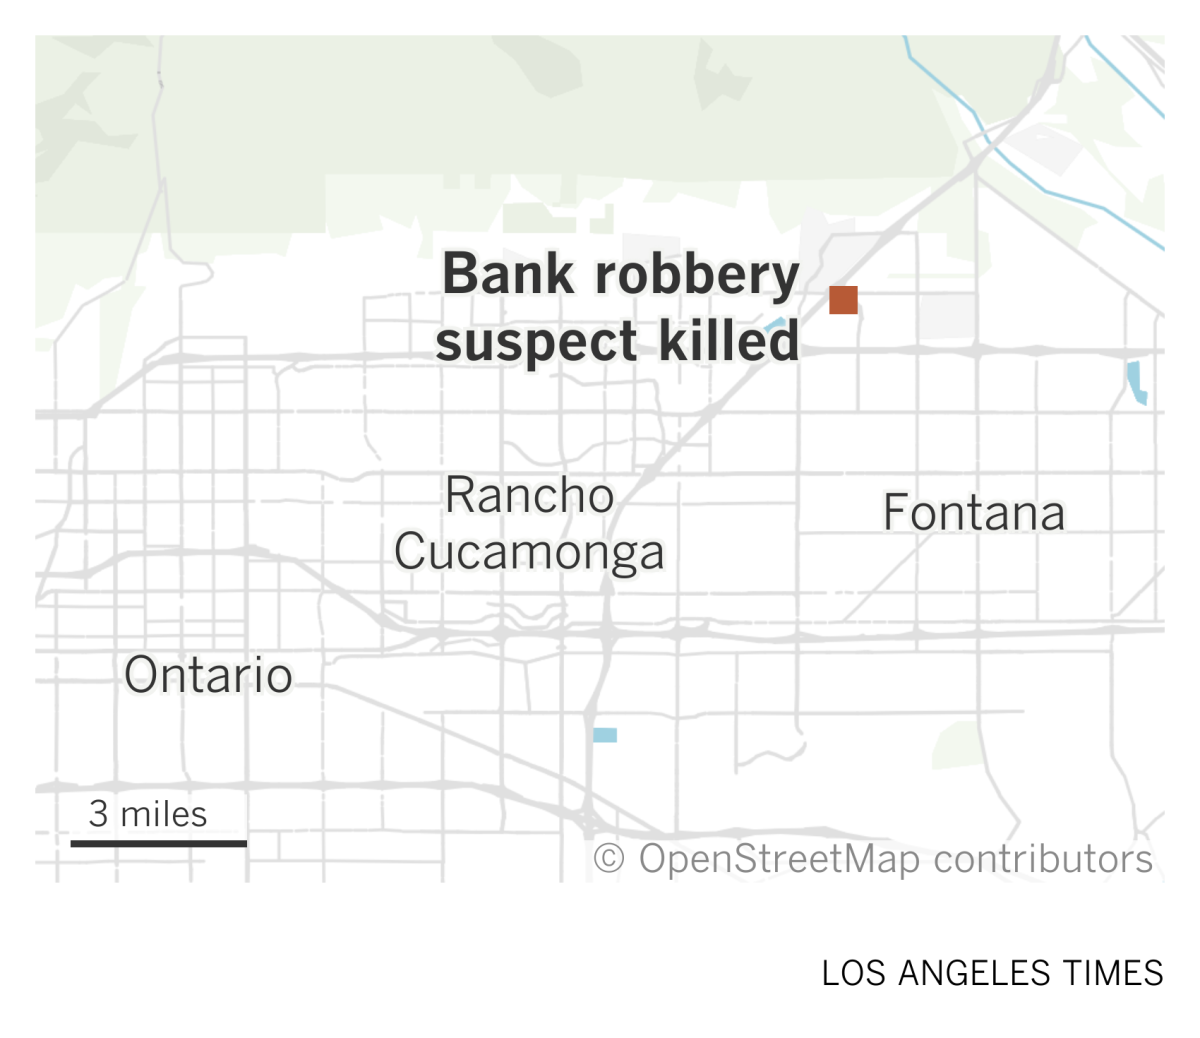 A map of the Inland Empire showing the location of a Bank of America where a robbery suspect was killed in Fontana